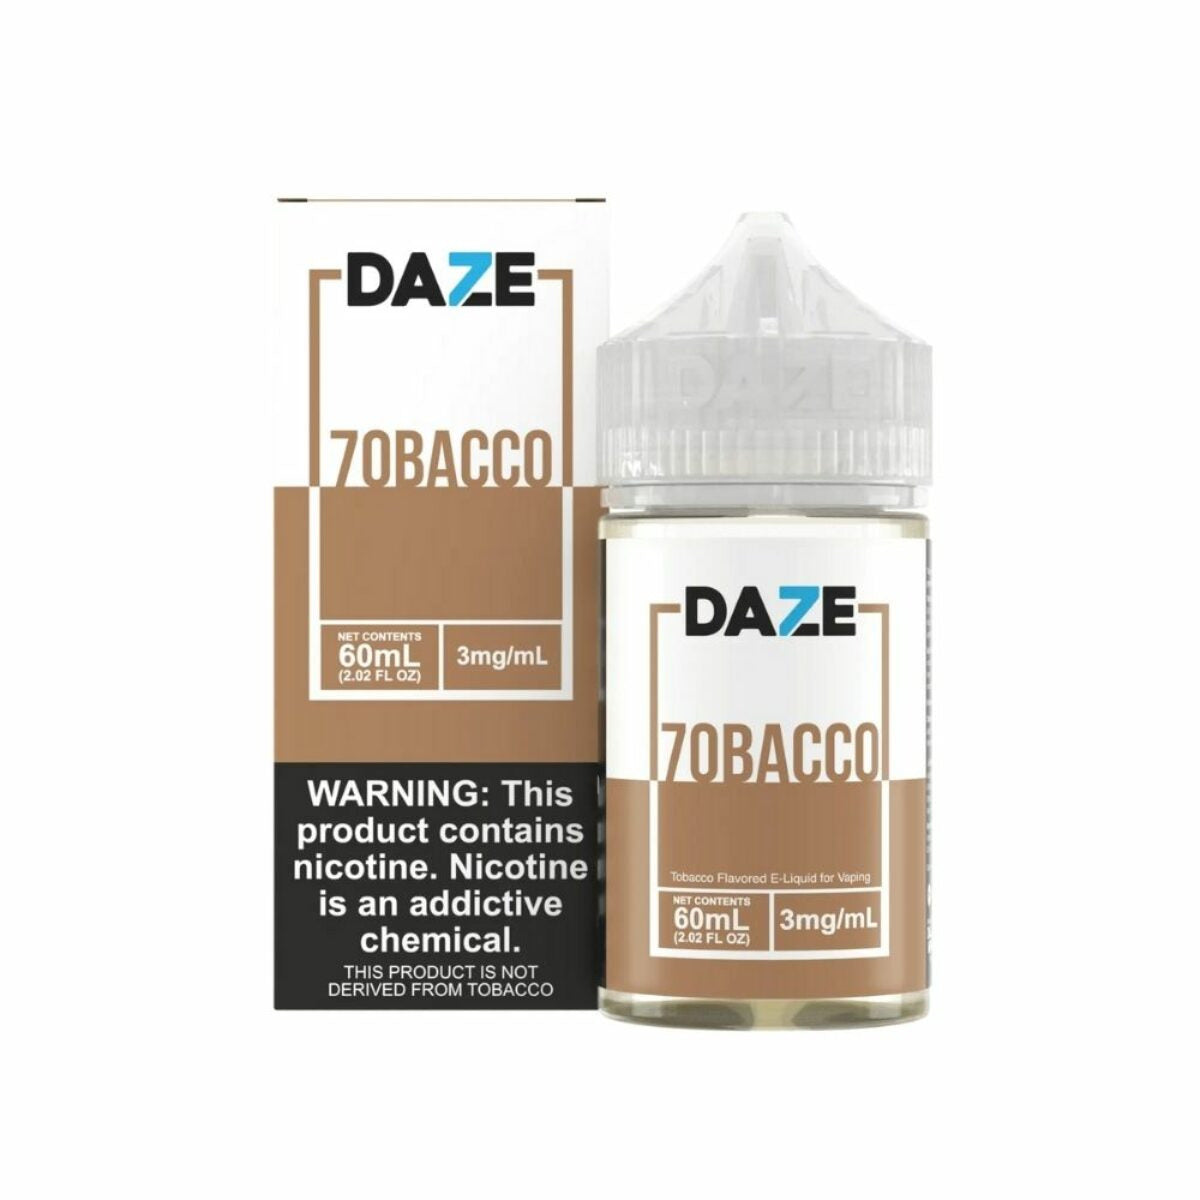 7obacco by 7Daze TFN Salt Series 30ml with packaging